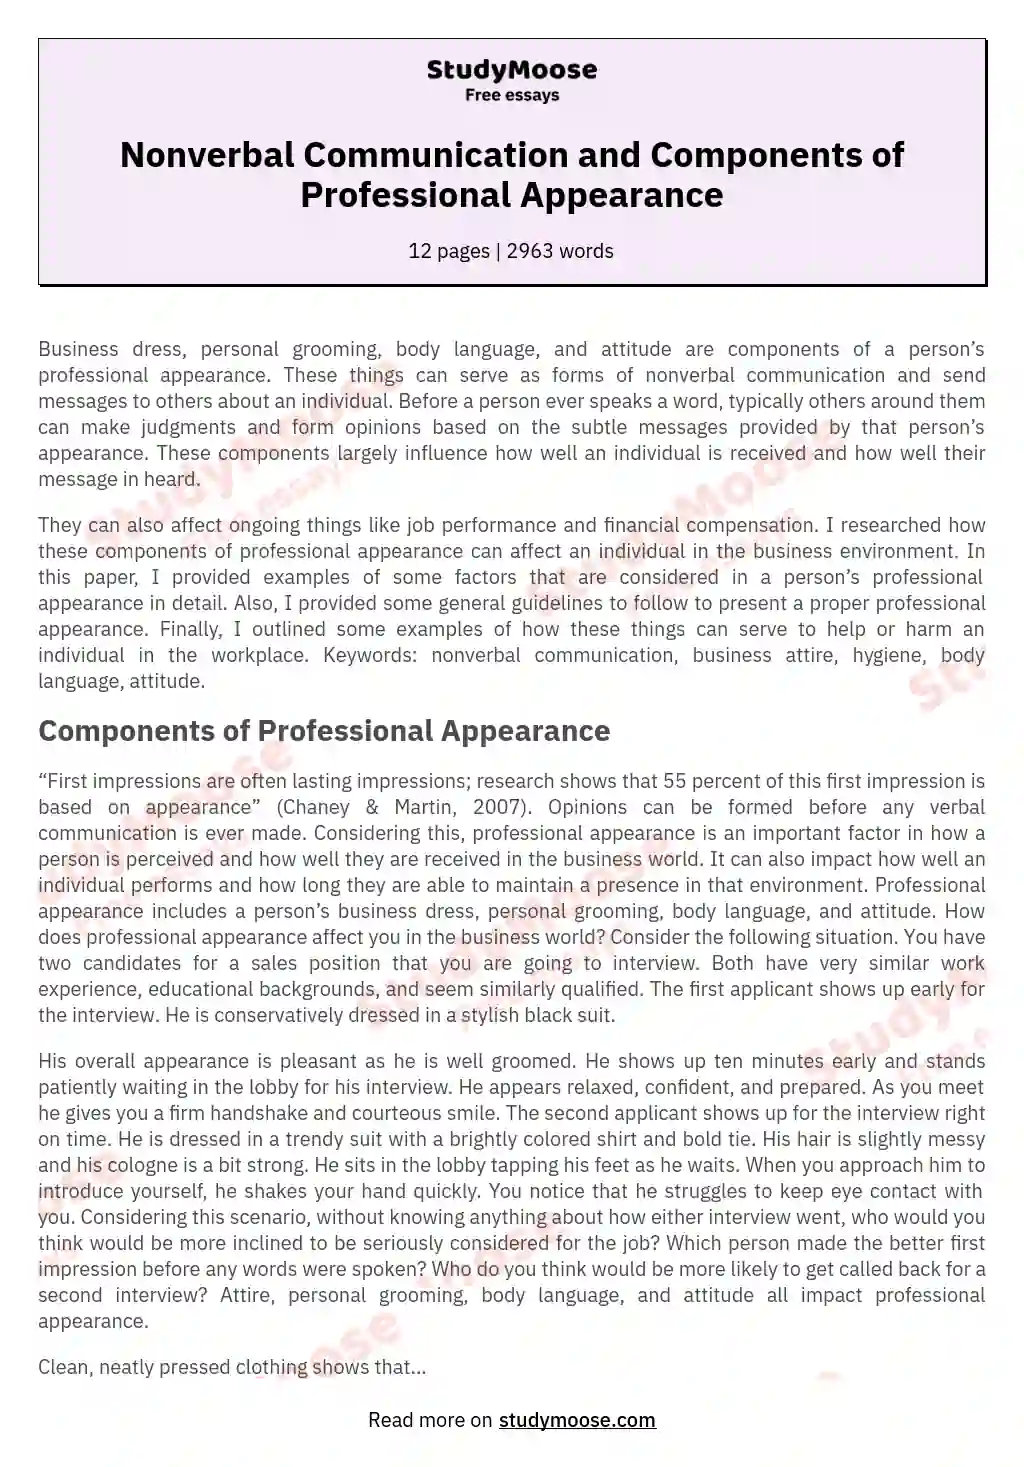 Nonverbal Communication and Components of Professional Appearance